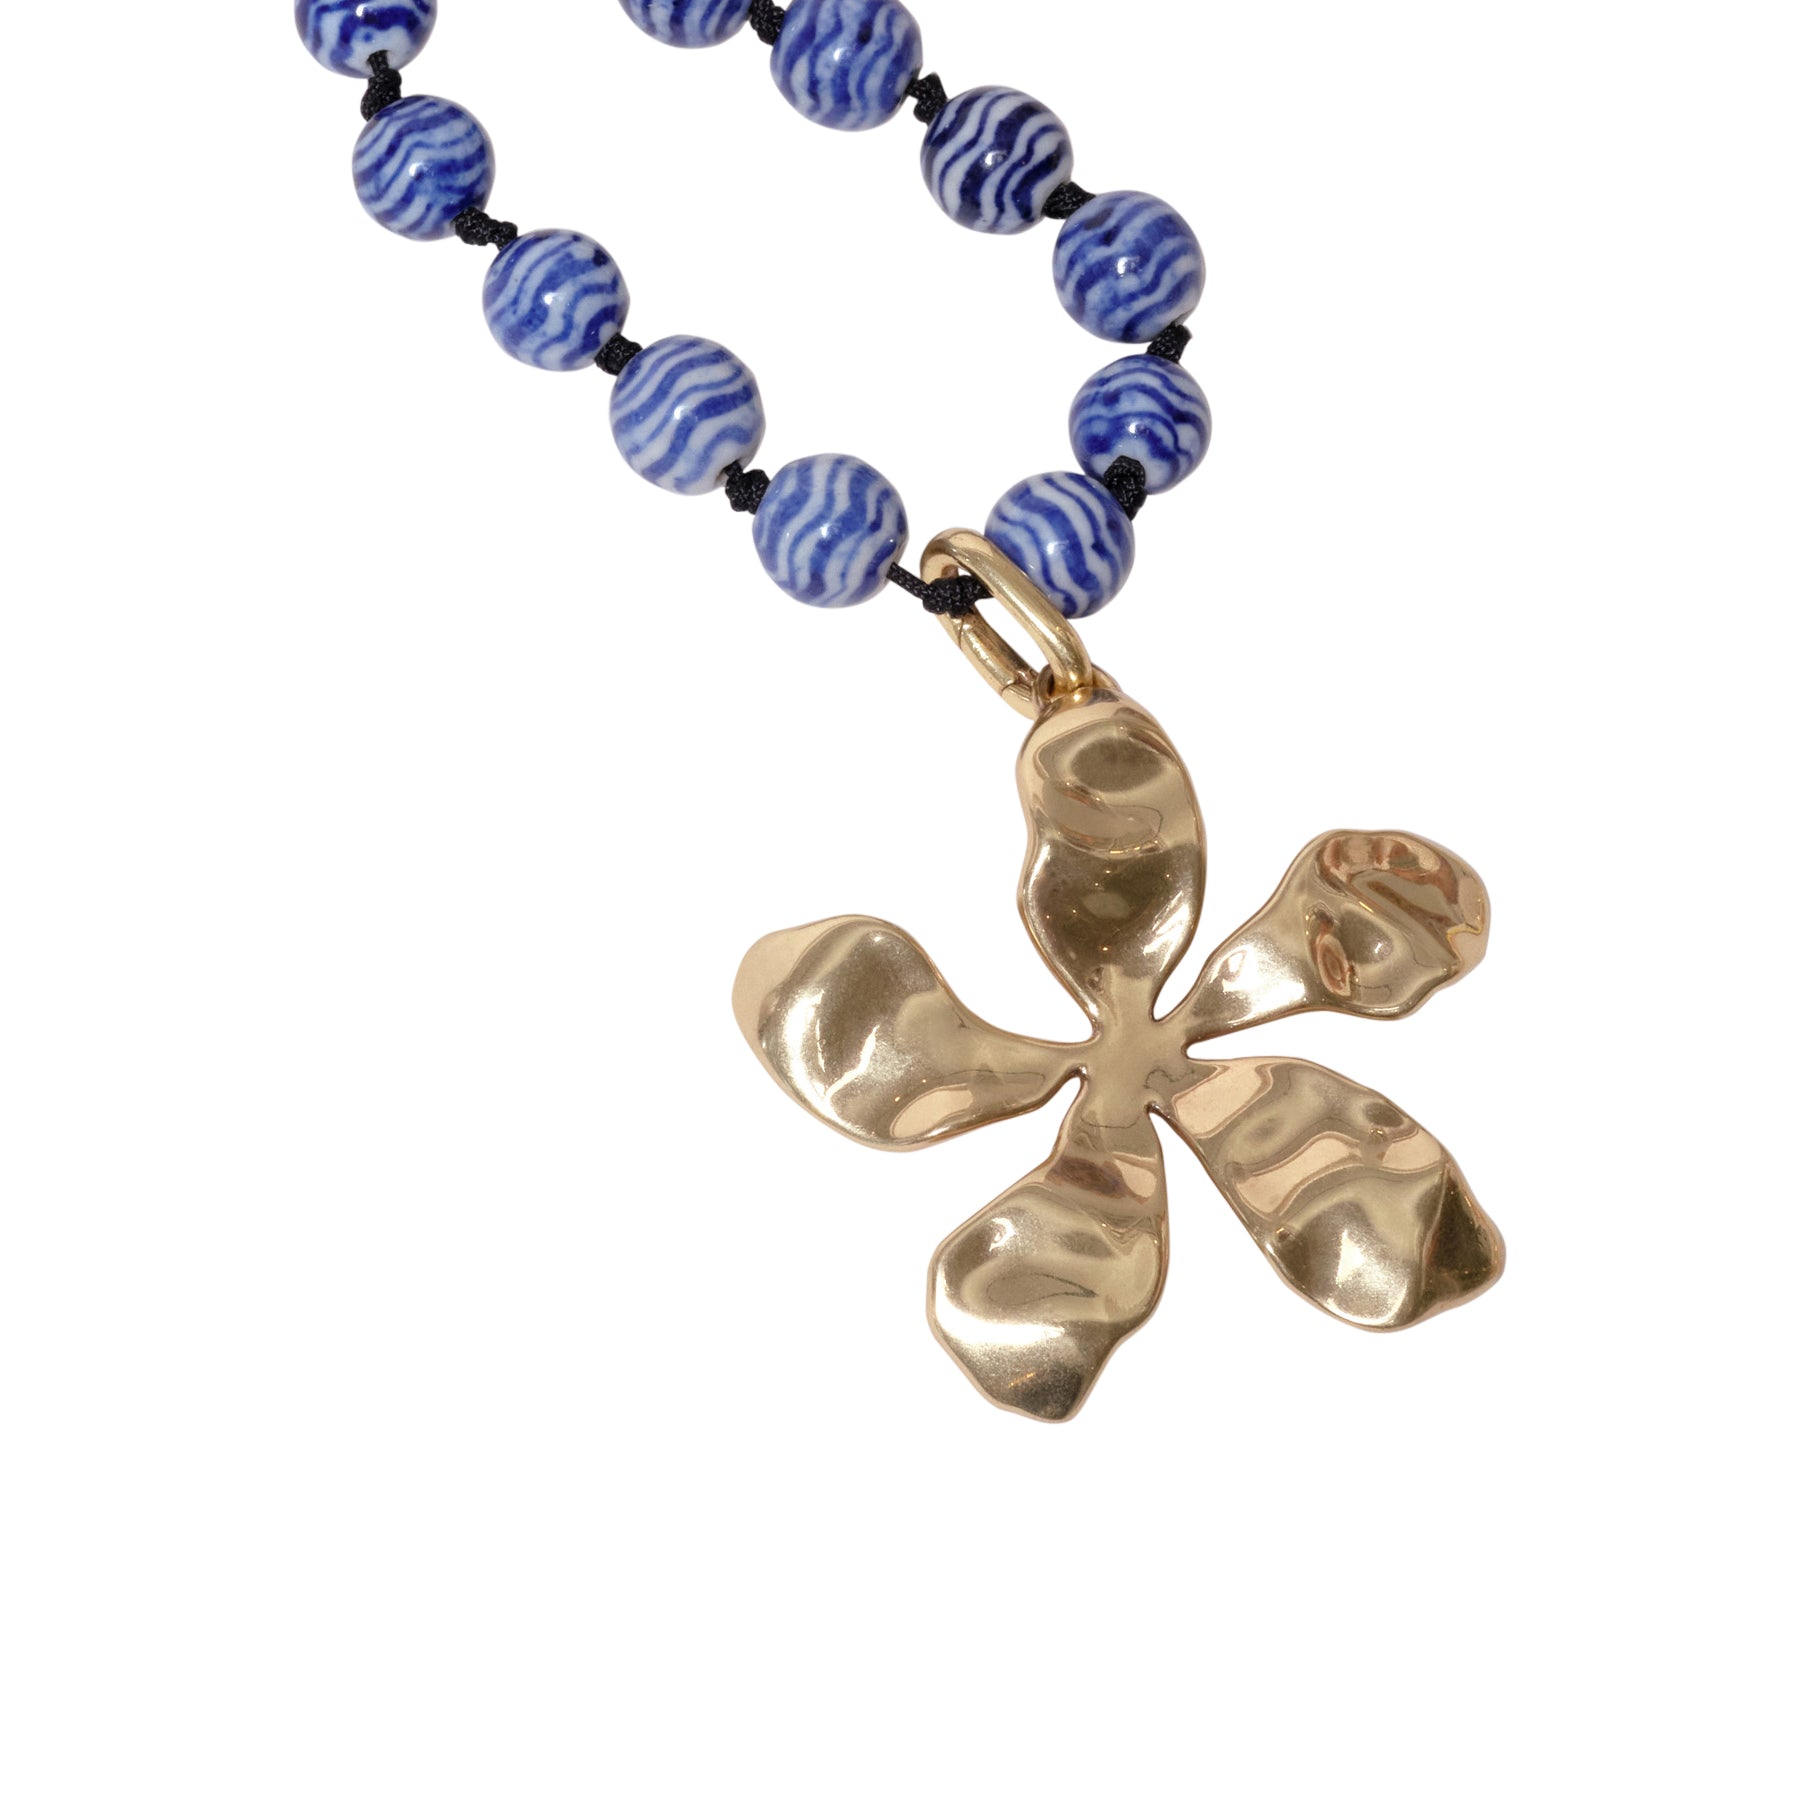 Blue and White Marbled Glass Bead Strand with Gold Organic Flower Pendant Charm on Flat White Background